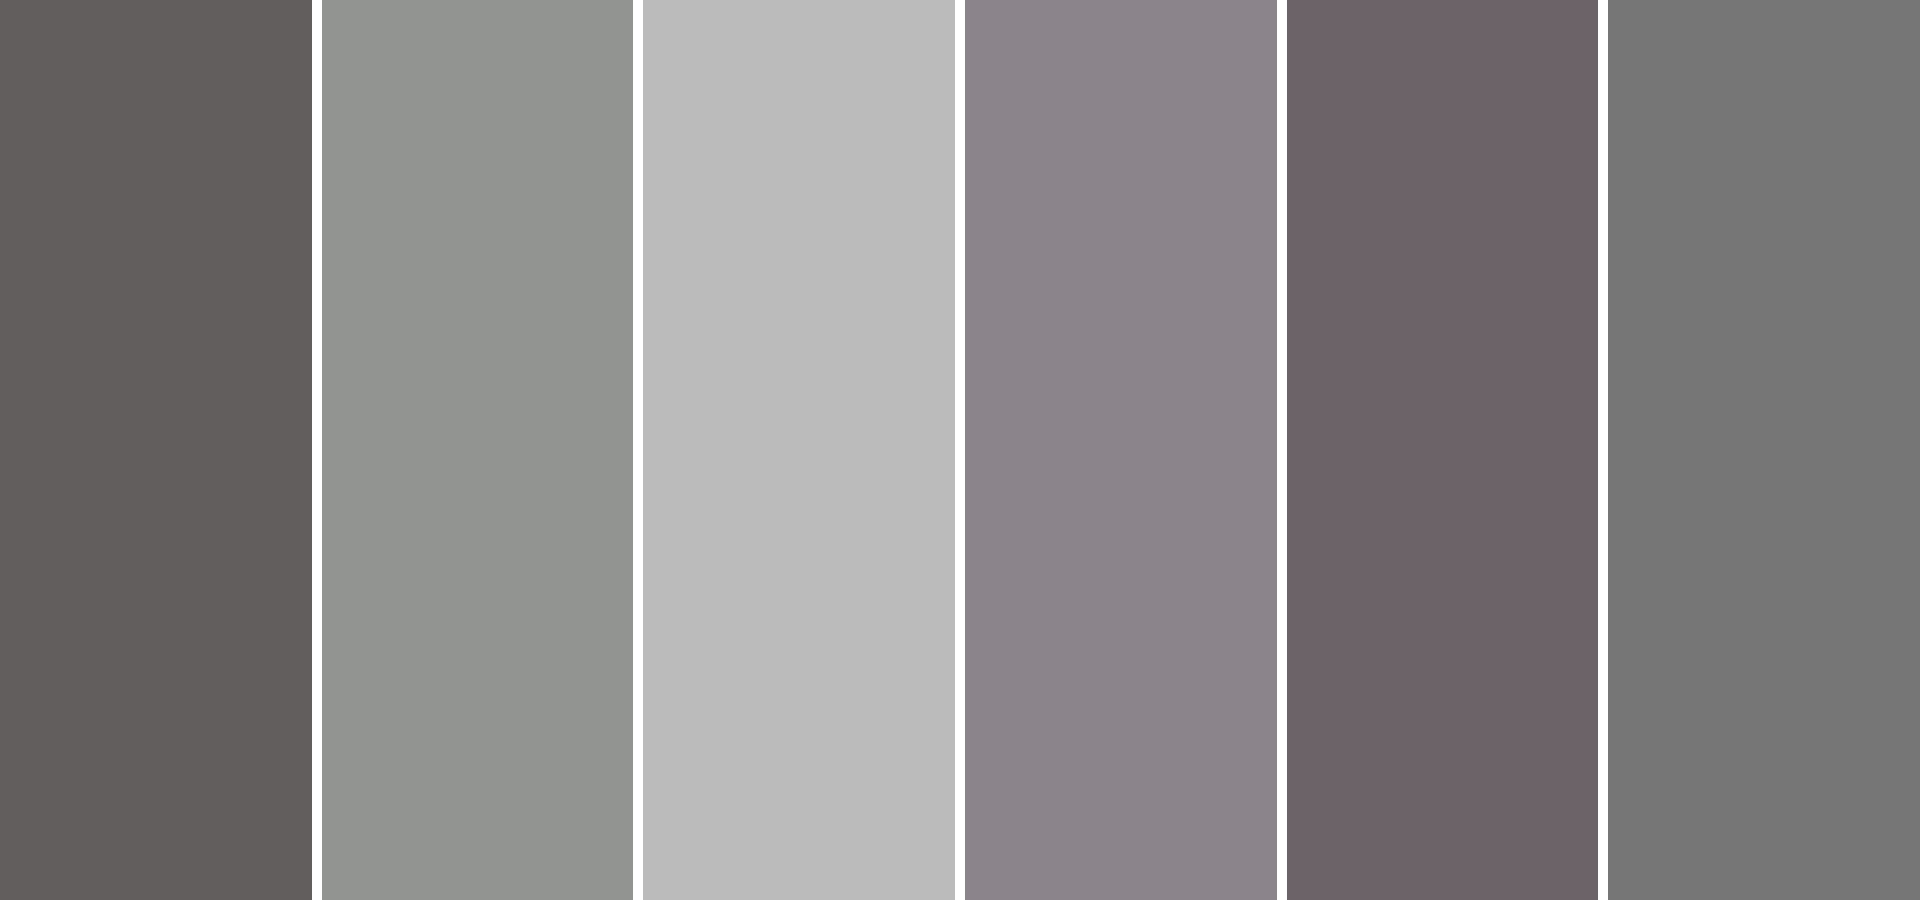 Different types of grey